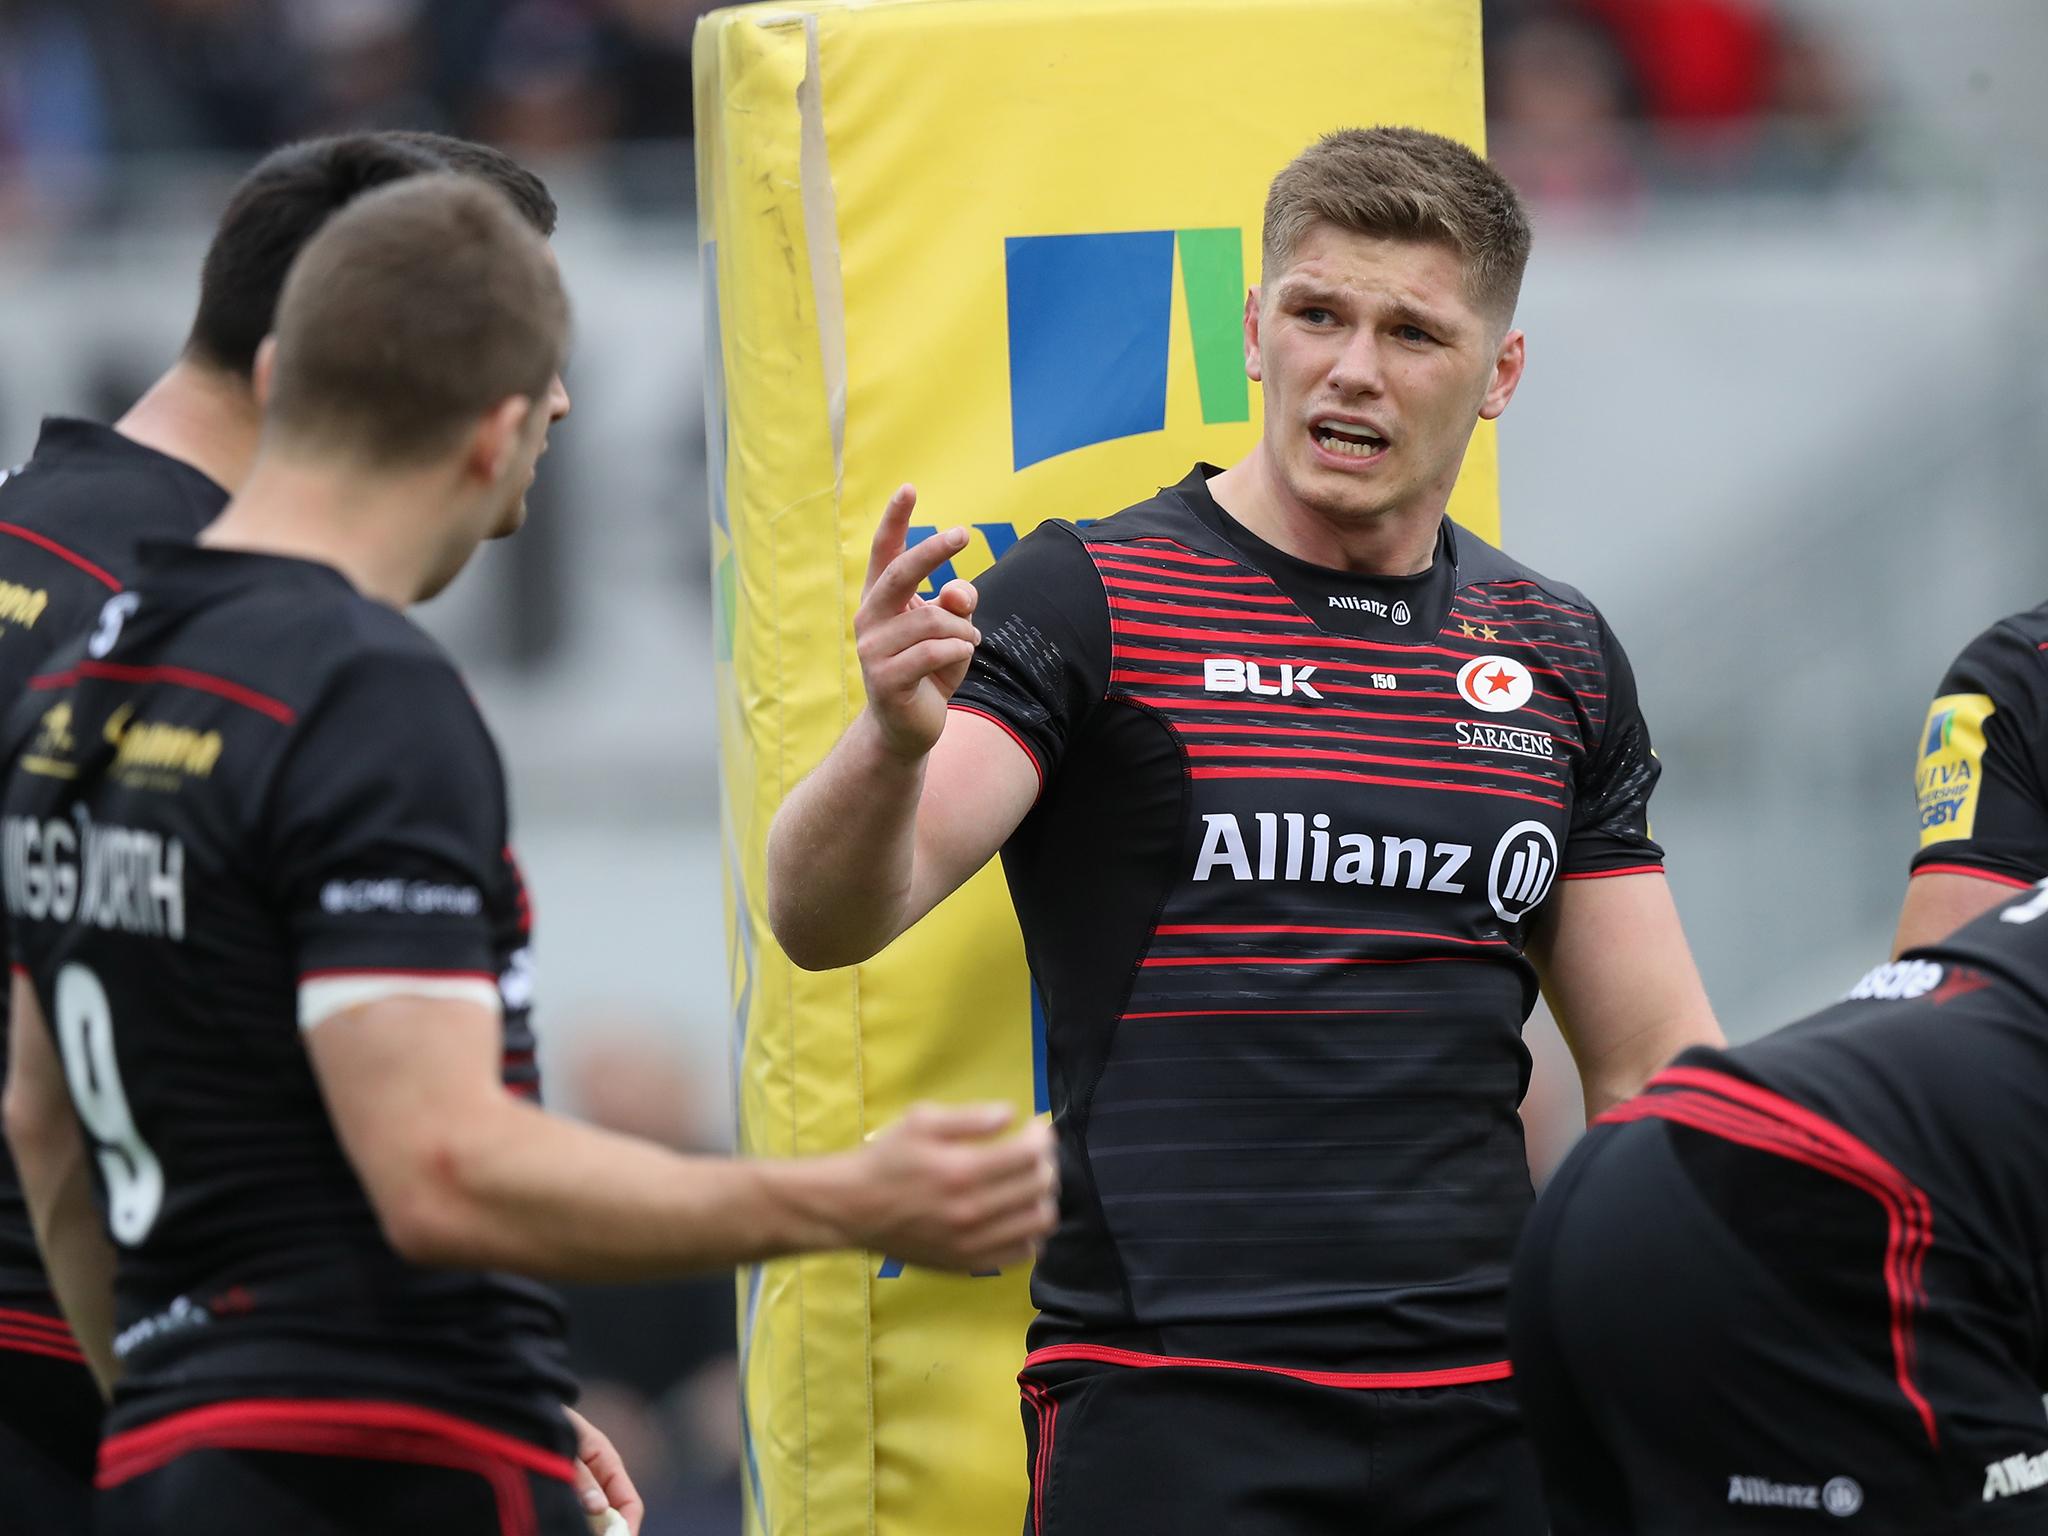 Owen Farrell will captain England in South Africa